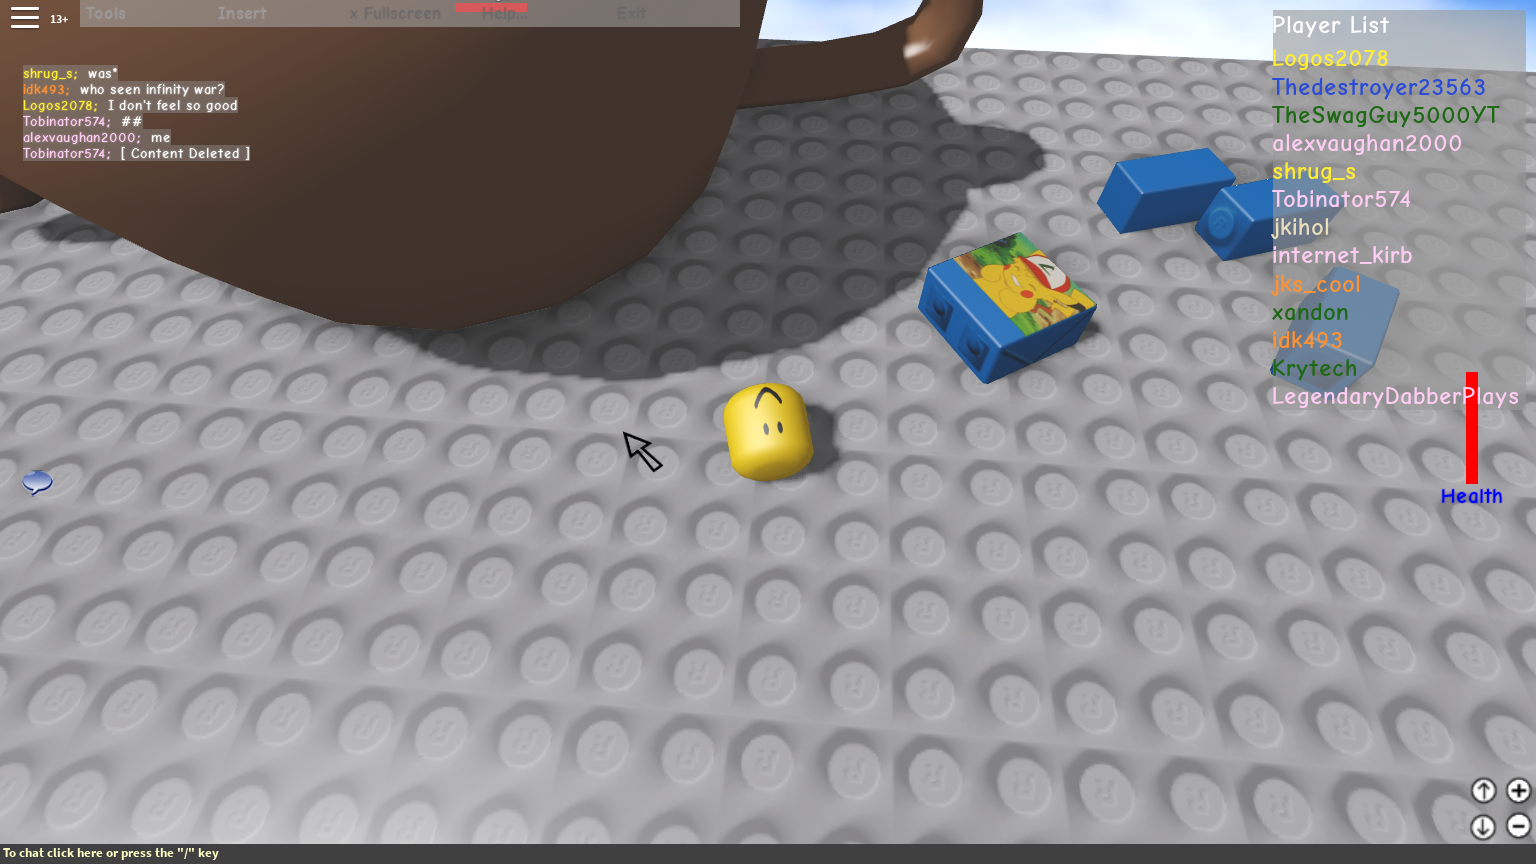 I Hate Teapots By Owencarlsonisback On Deviantart - how to get the shrug emote roblox